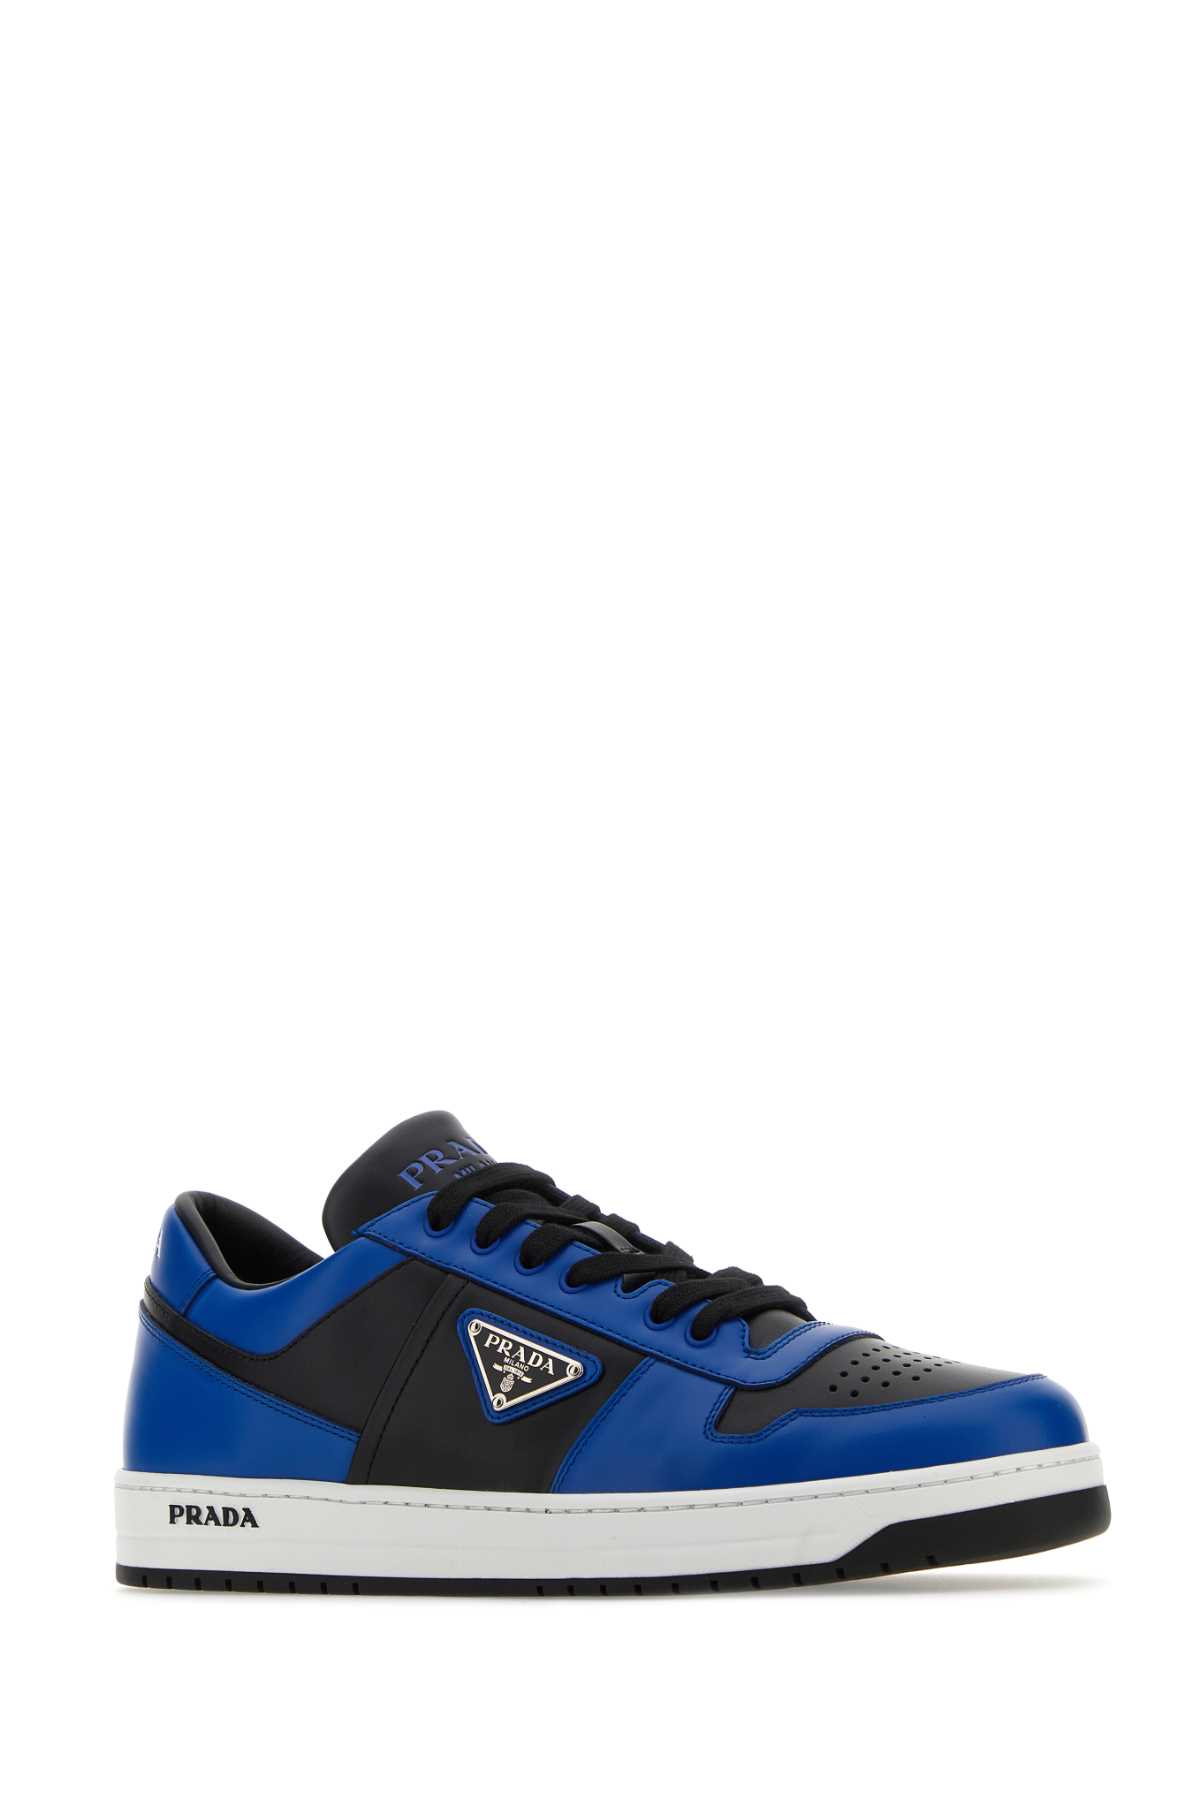 Prada Two-tone Leather Downtown Trainers In Nerocobalto